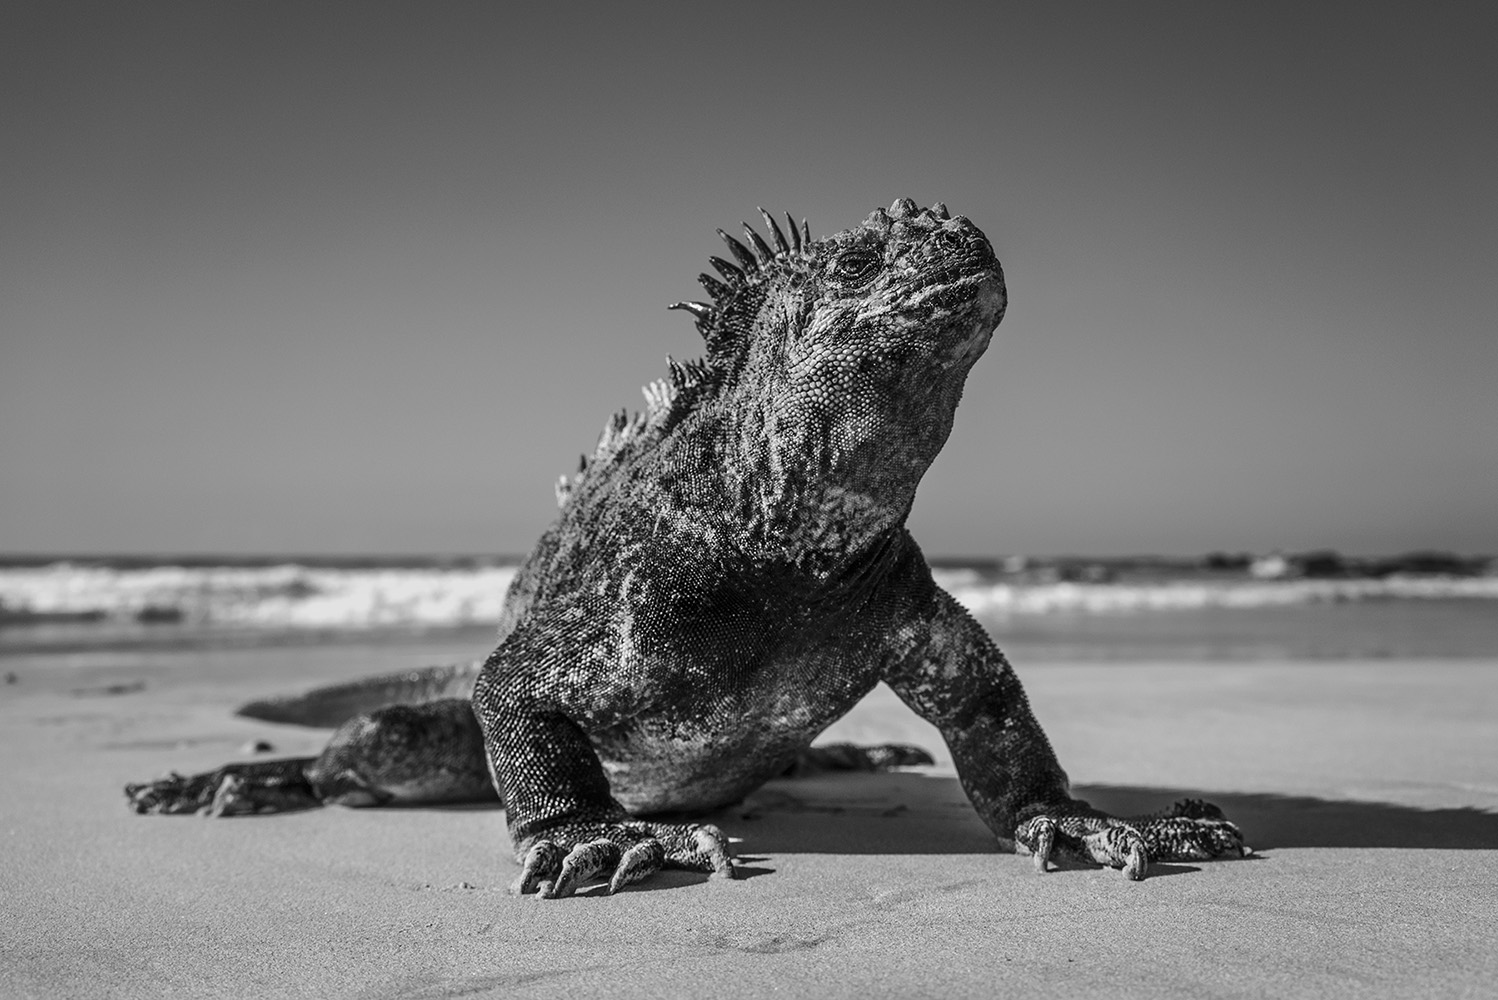 Marine iguana, Isabela Island, unique animal of the Galapagos Islands. The marine iguana (Amblyrhynchus cristatus) is an iguana found only on the Galápagos Islands. It feeds on algae and can dive over 9 meters into the water. They are the world‘s only sea-going lizards and must warm its body in the sun after swimming in cold ocean waters, because reptiles do not have the ability to thermoregulate. The average lenght of an adult male is 1.3 meters and the weight up to 13kg.